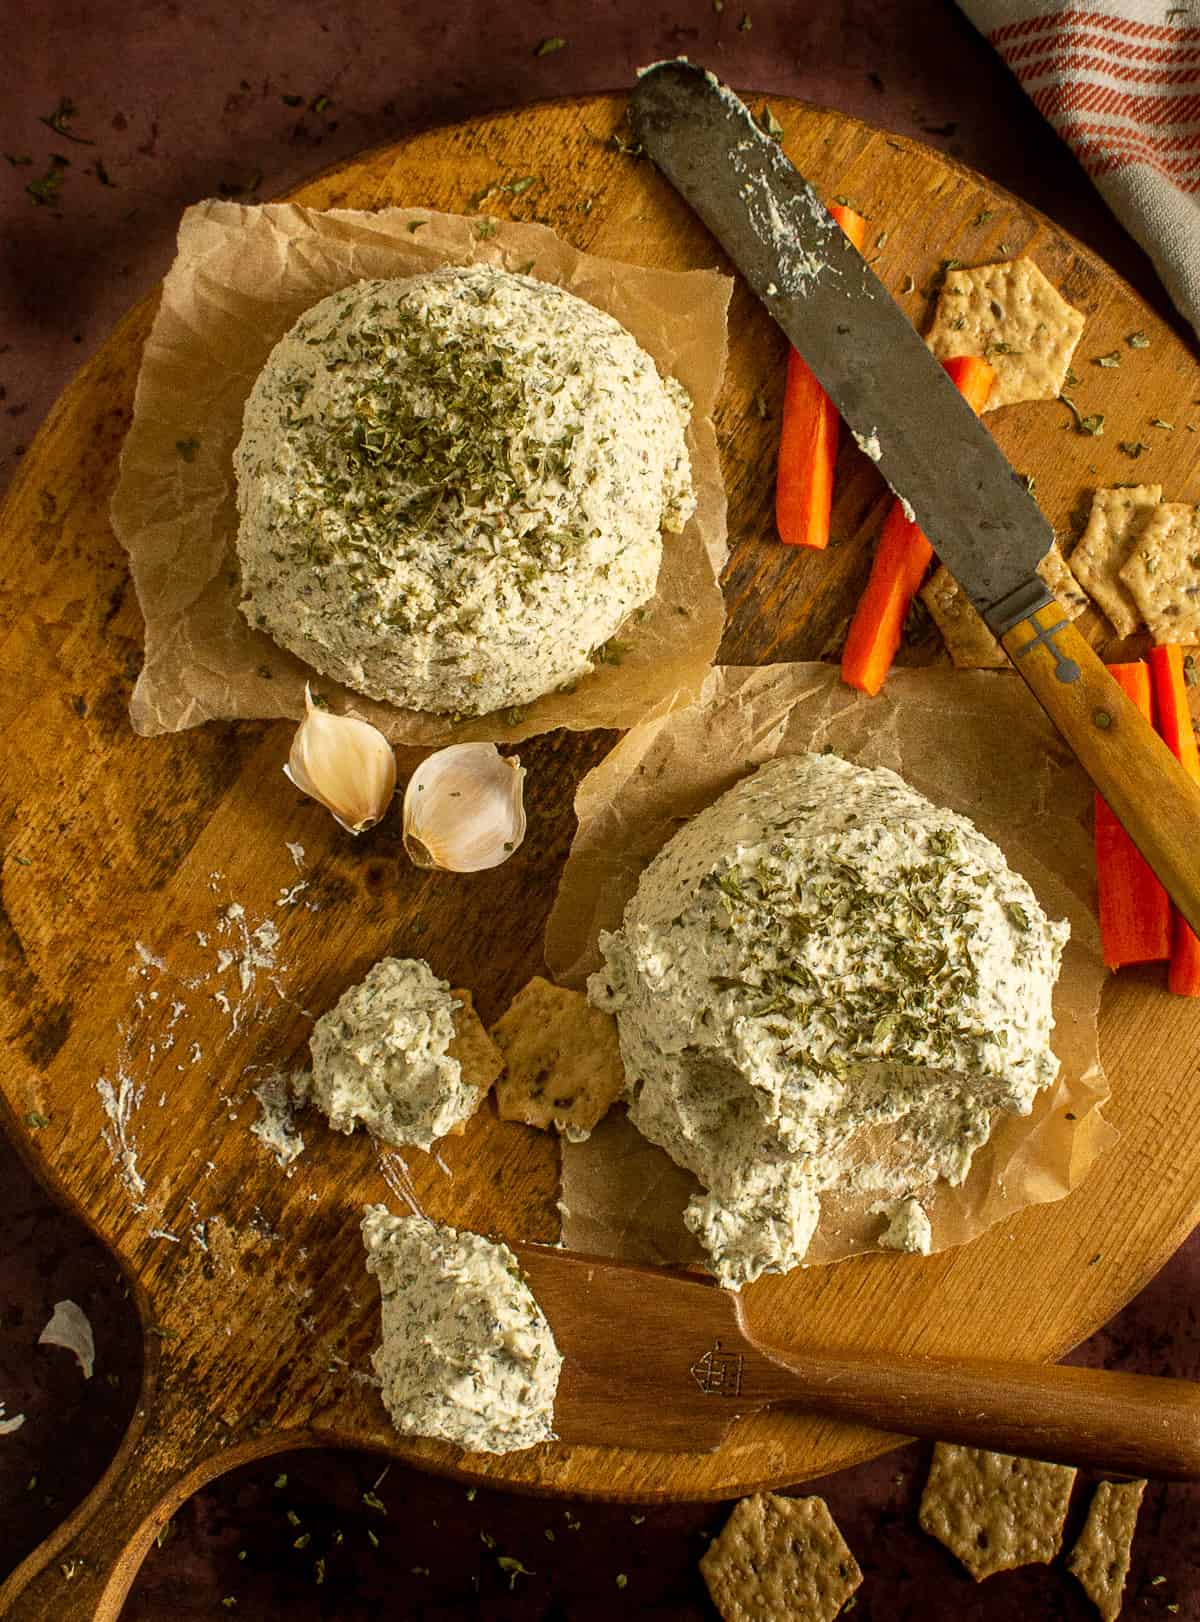 garlic herb vegan cheese spread on board with crackers and knives.